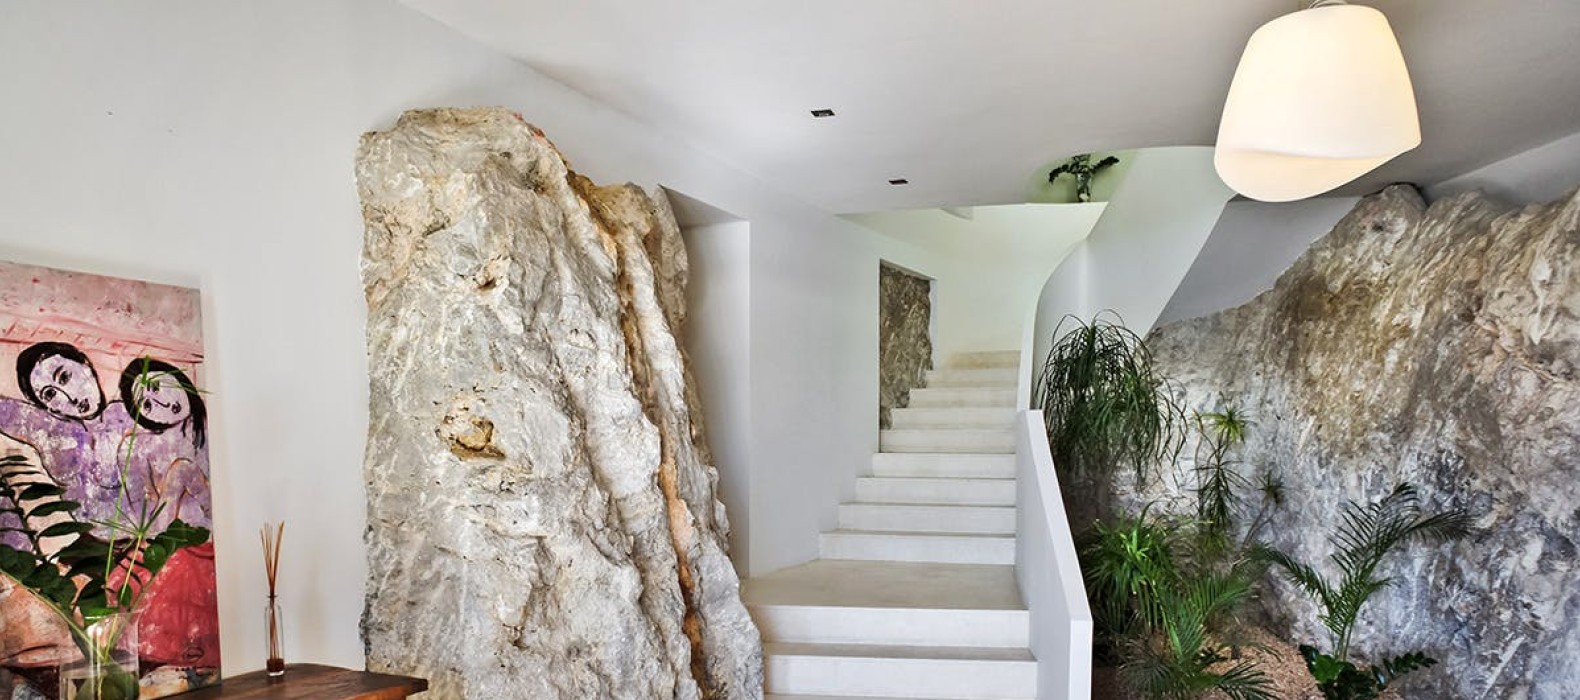 Stairs and hall waz with nature stone of Casa Savant in Ibiza